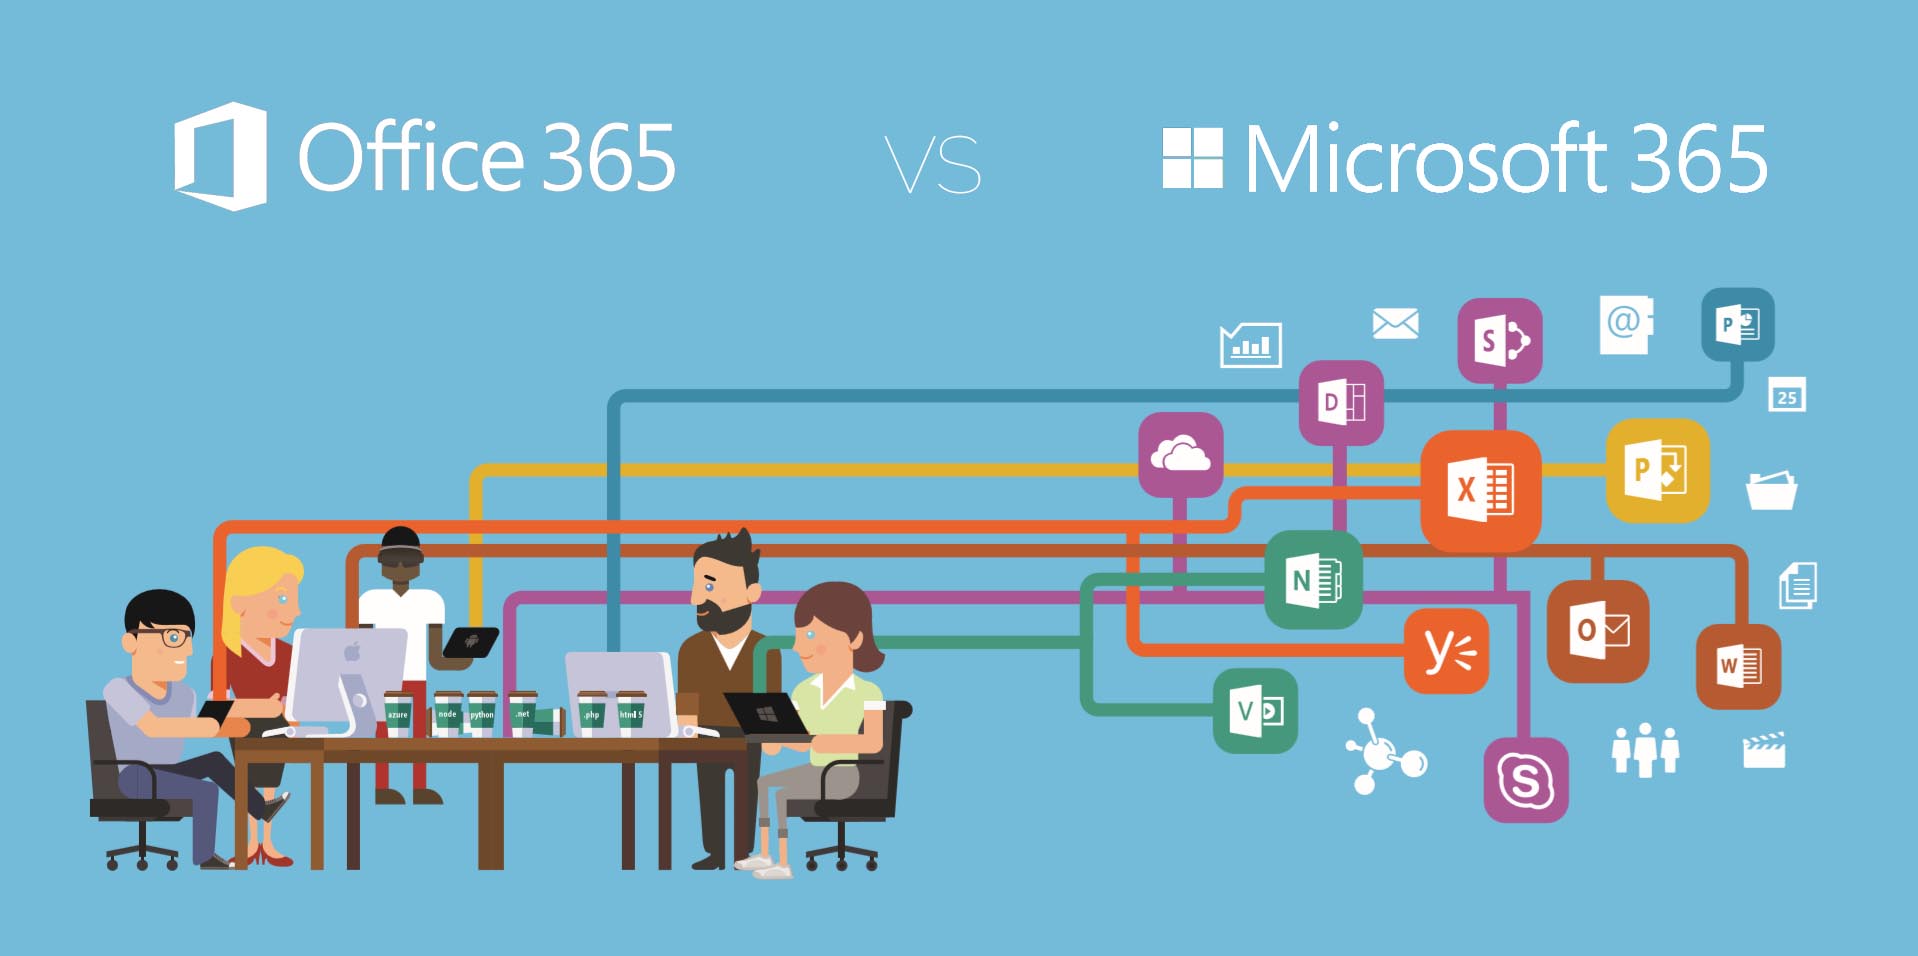 Microsoft 365 Business vs Office 365: What's the difference? - MODEX